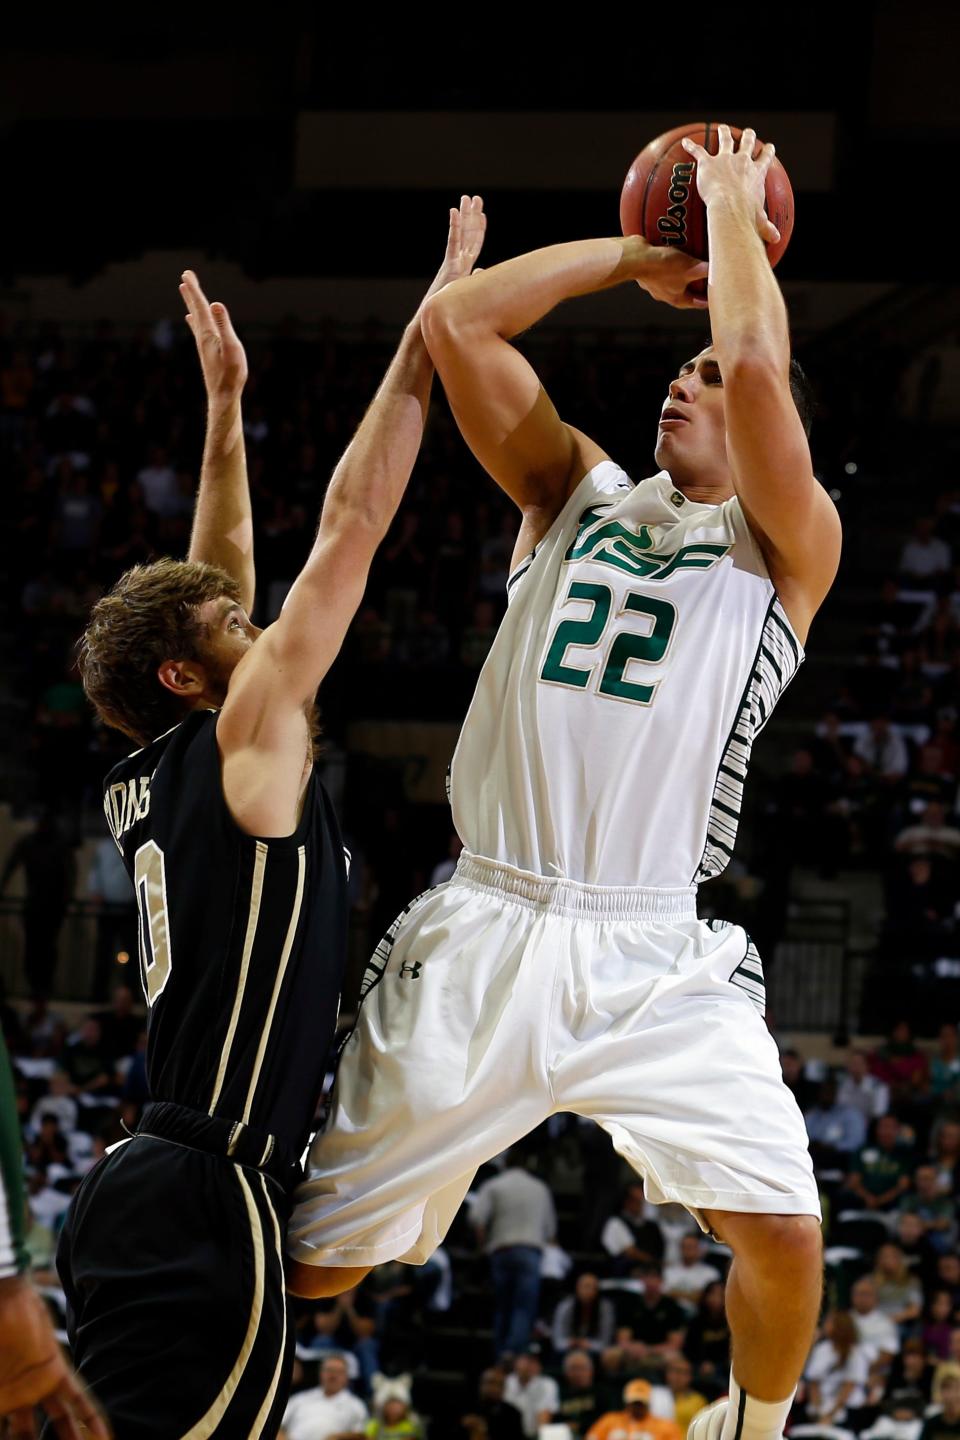 During 2011-12 college basketball season, Shaun Noriega was a shooting specialist on the University of South Florida team that earned a bid to the NCAA Tournament.